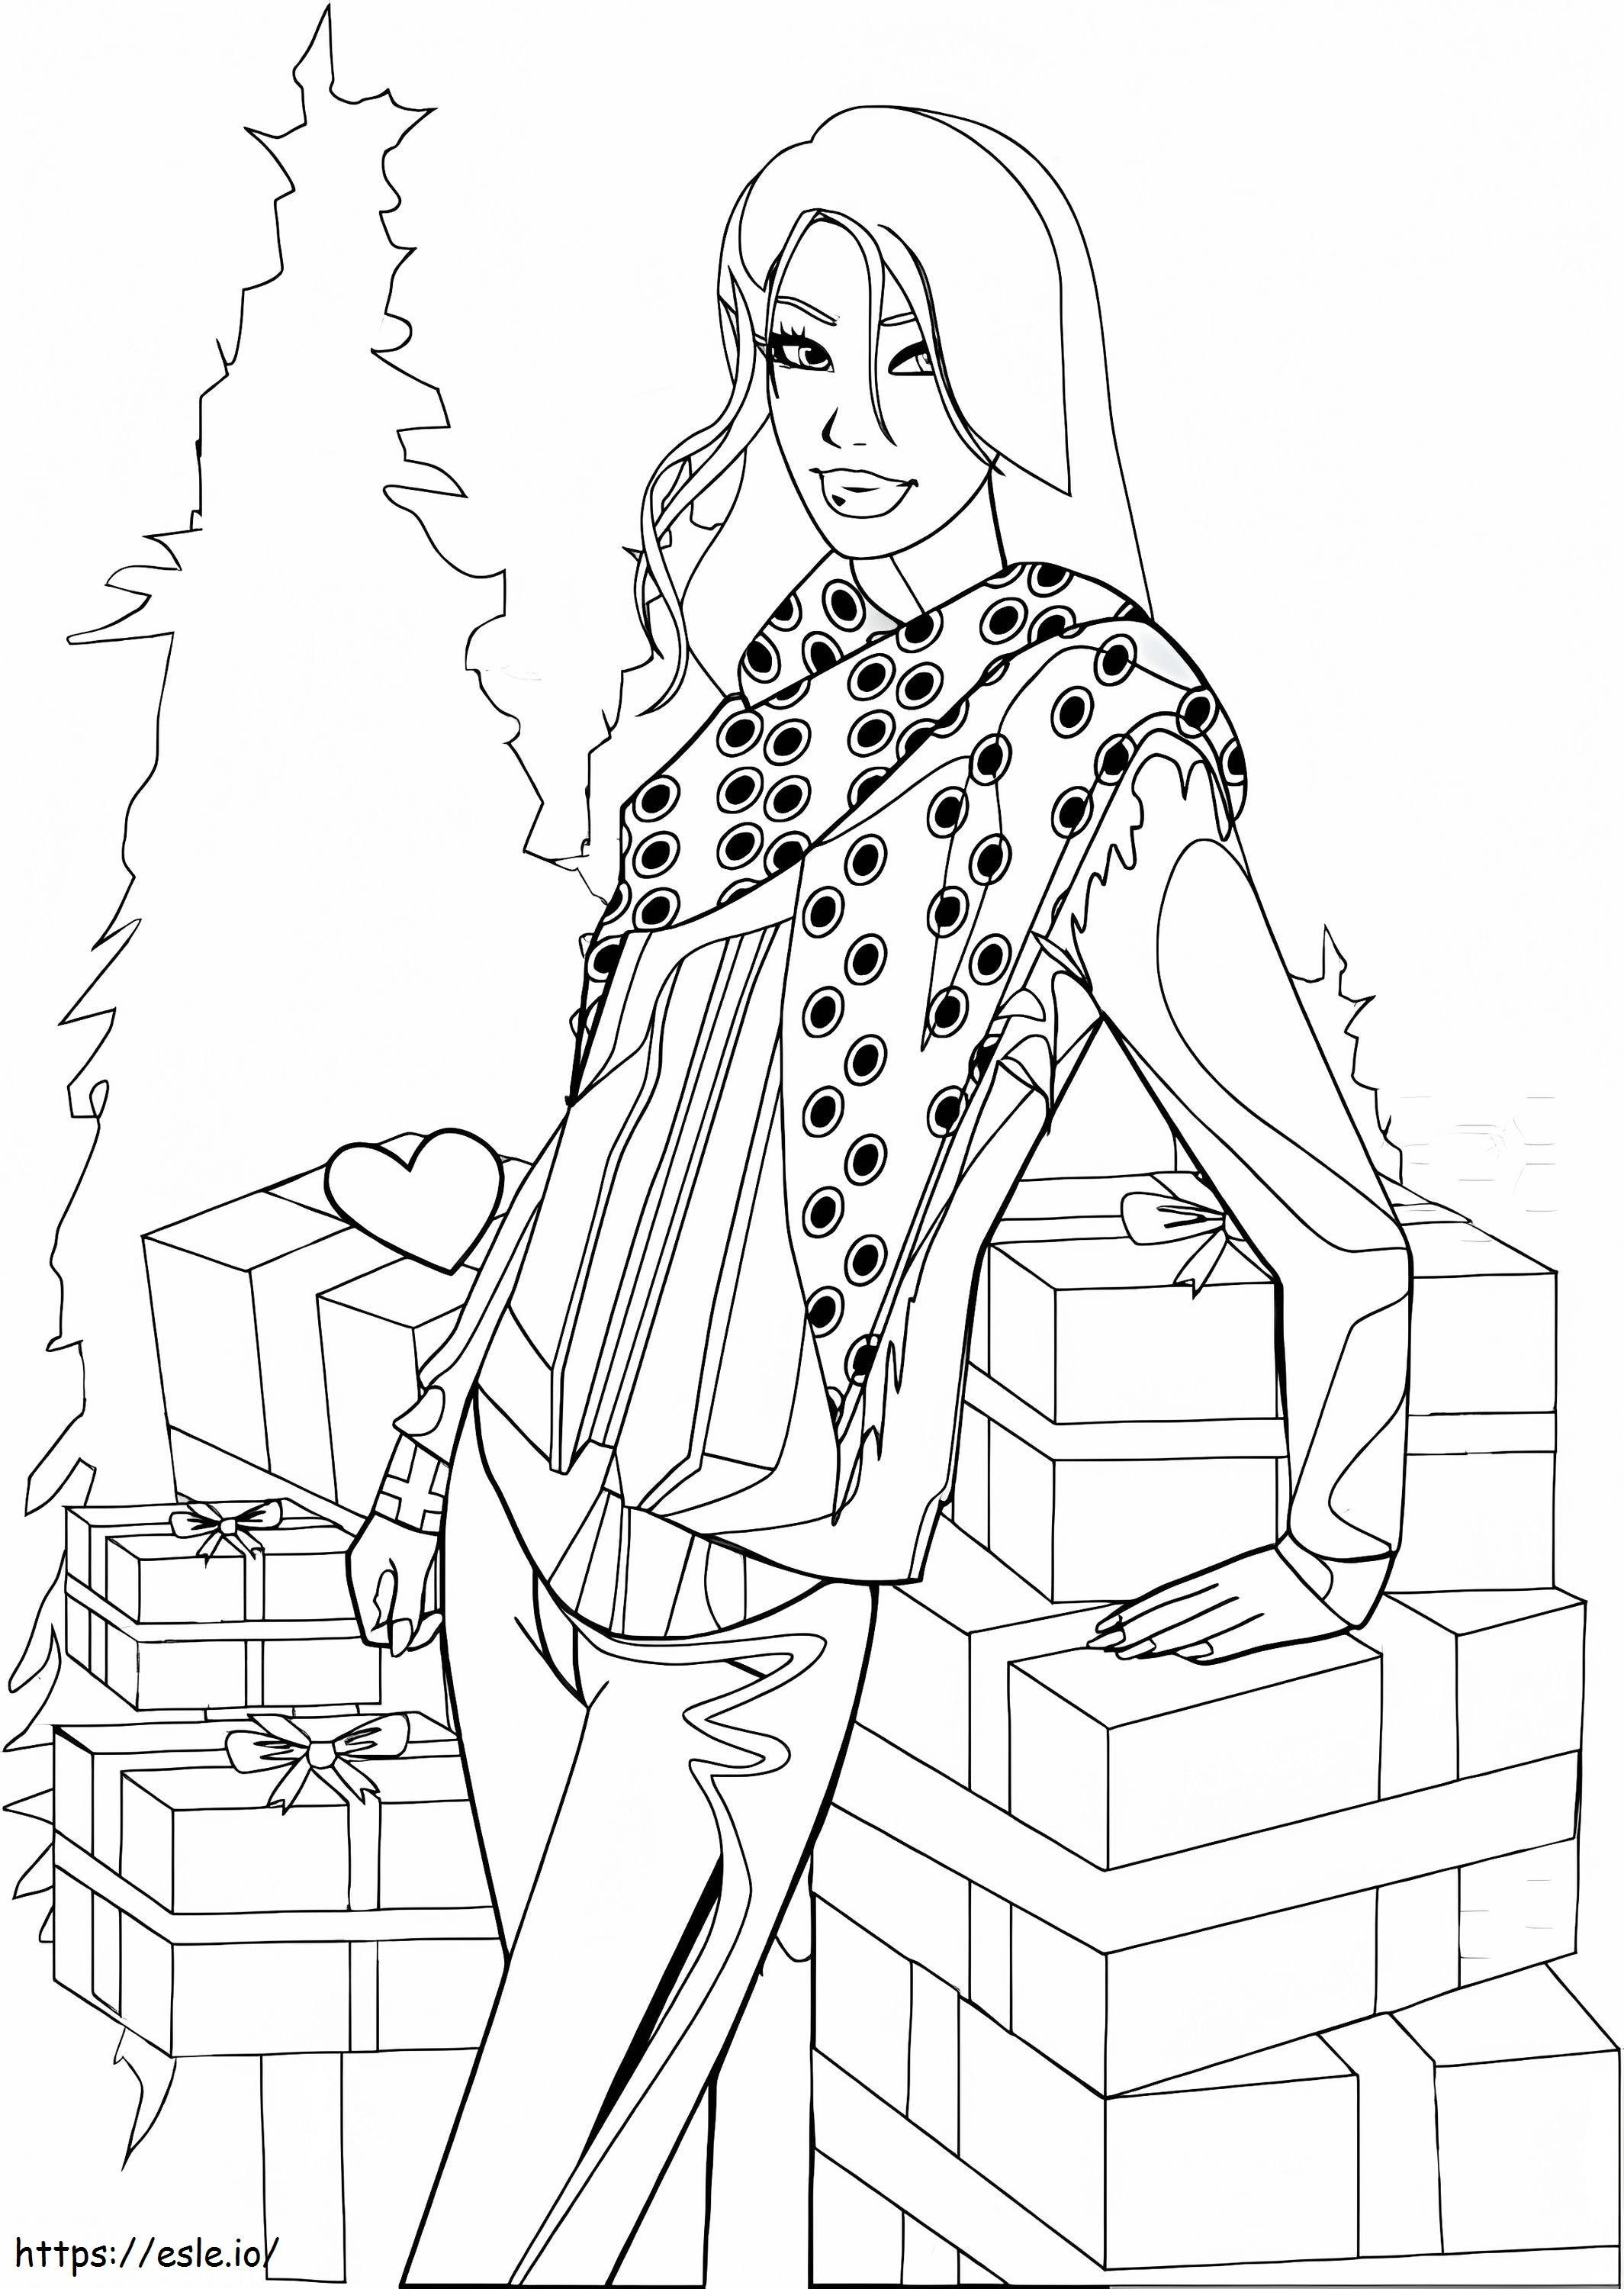 Girl And Gifts coloring page